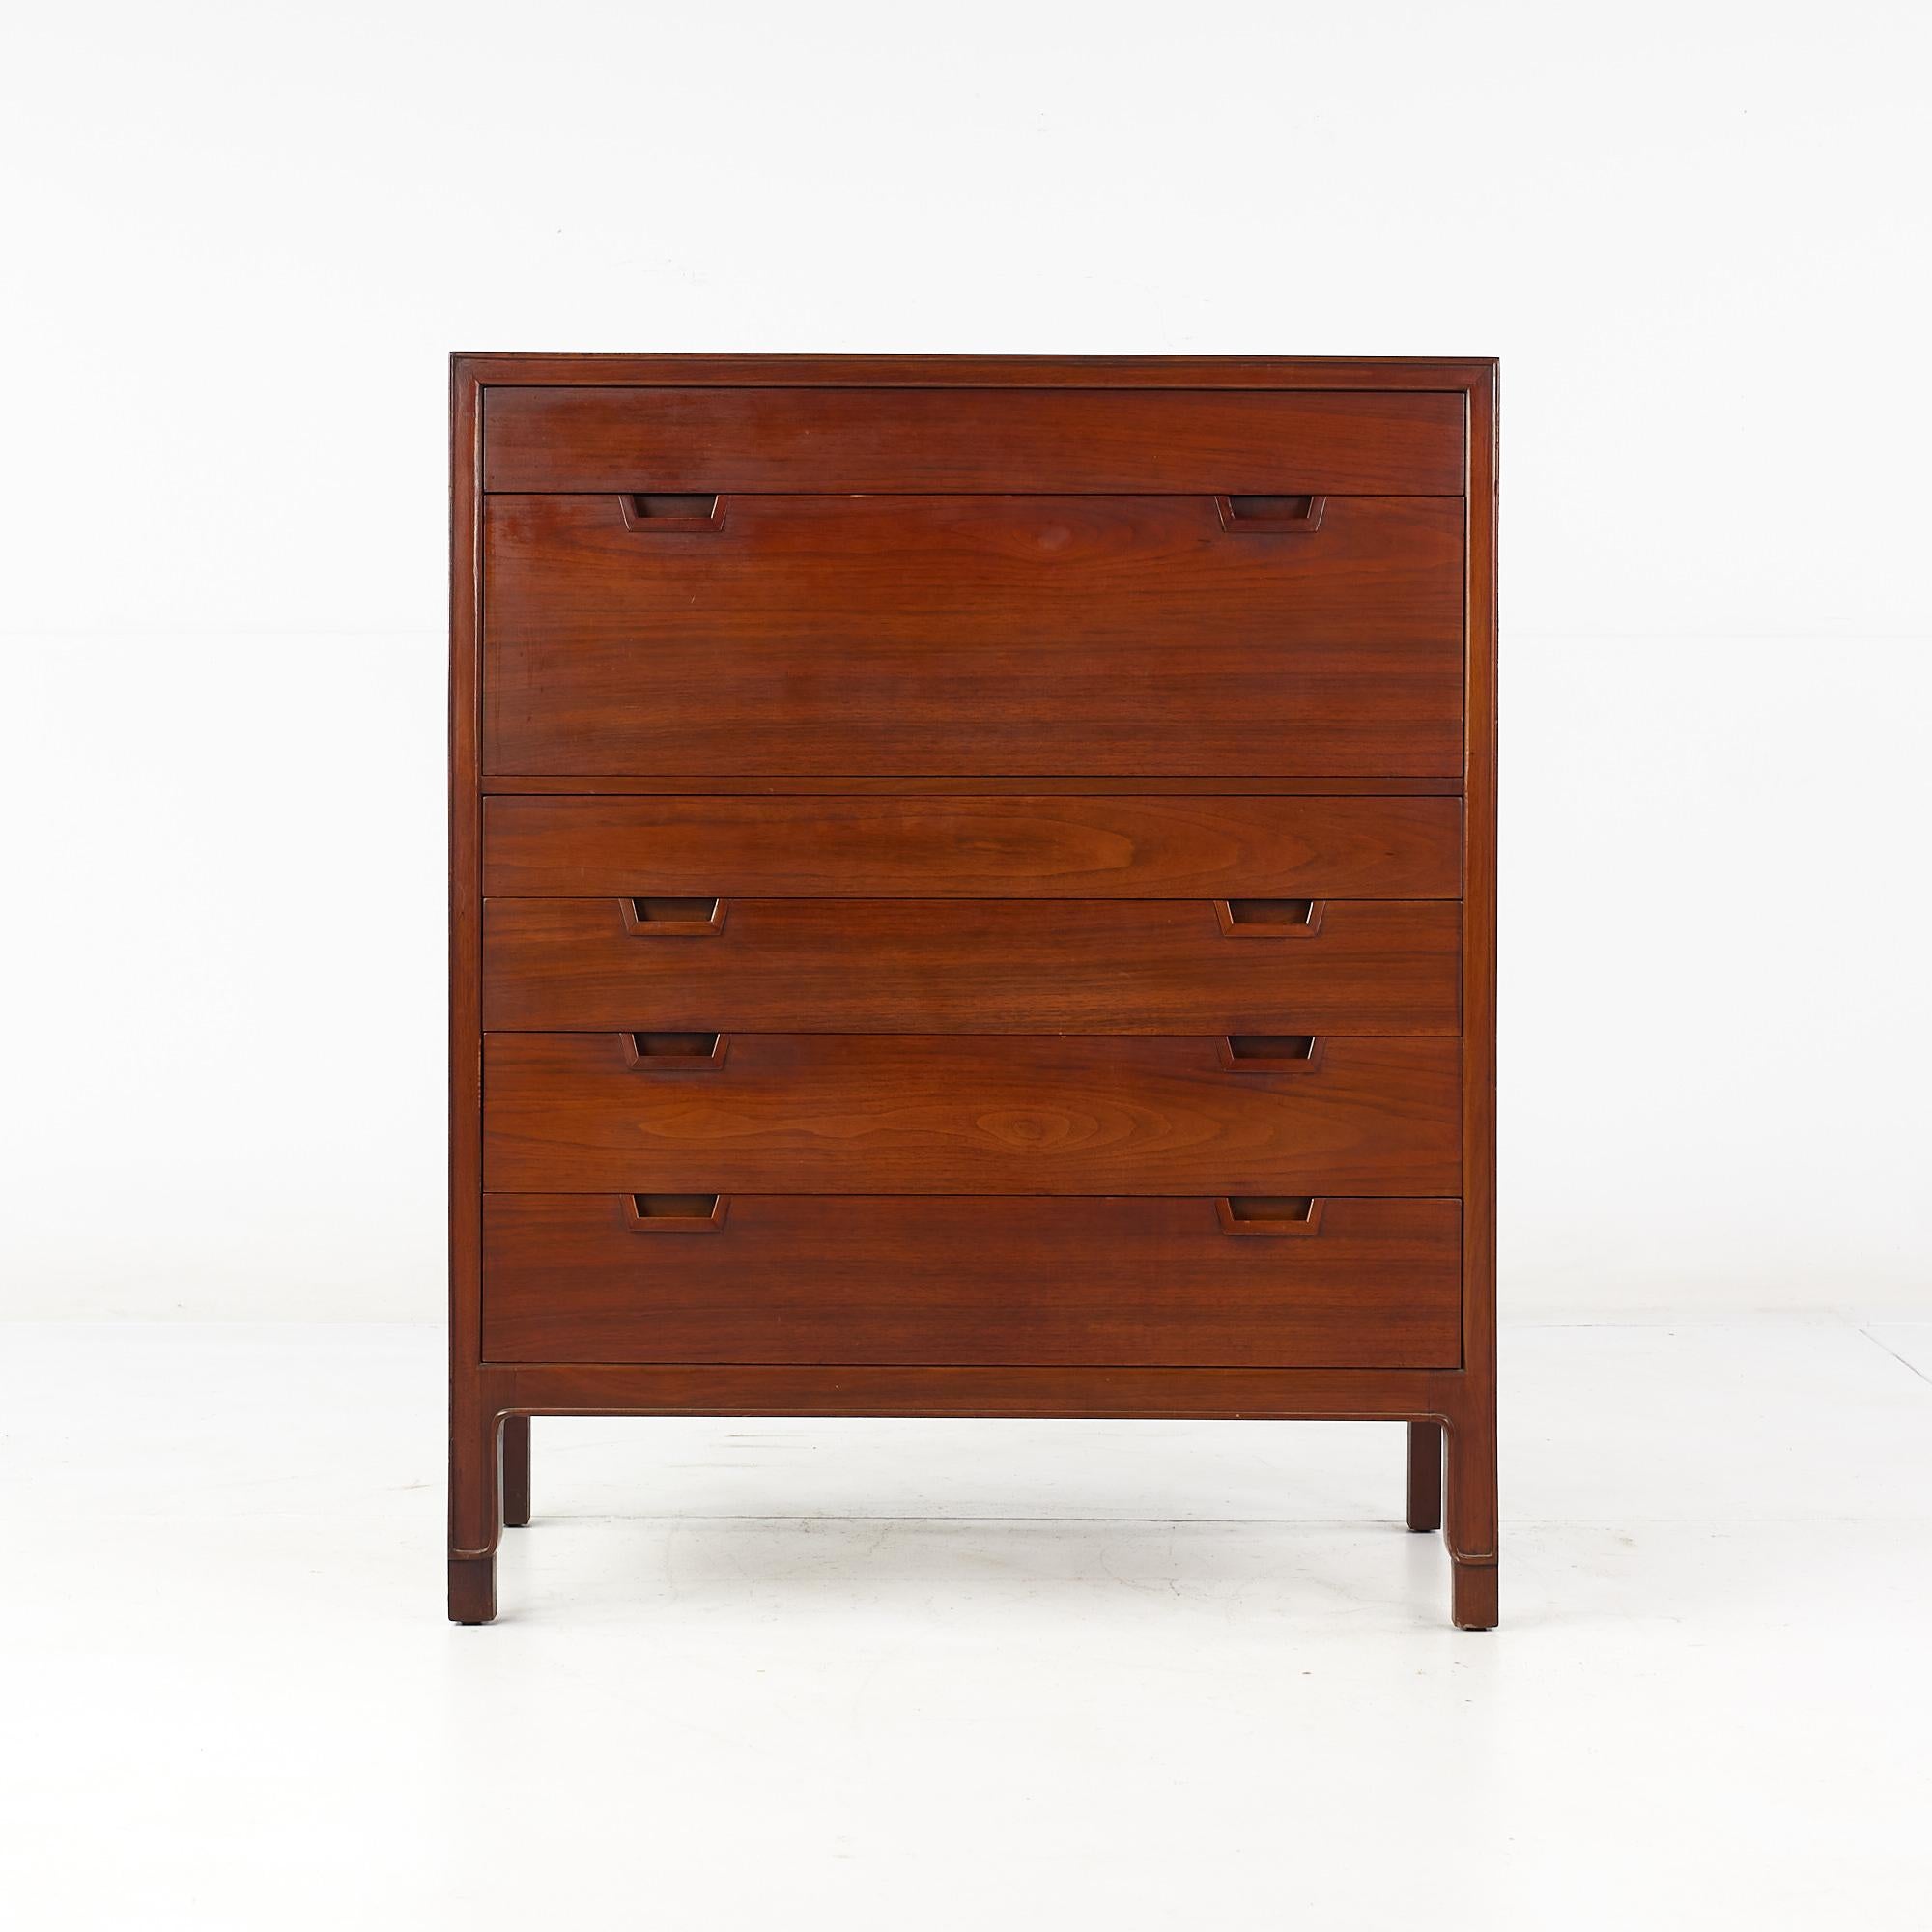 Mount Airy Janus mid century walnut highboy dresser

This dresser measures: 38 wide x 19 deep x 46.25 inches high

All pieces of furniture can be had in what we call restored vintage condition. That means the piece is restored upon purchase so